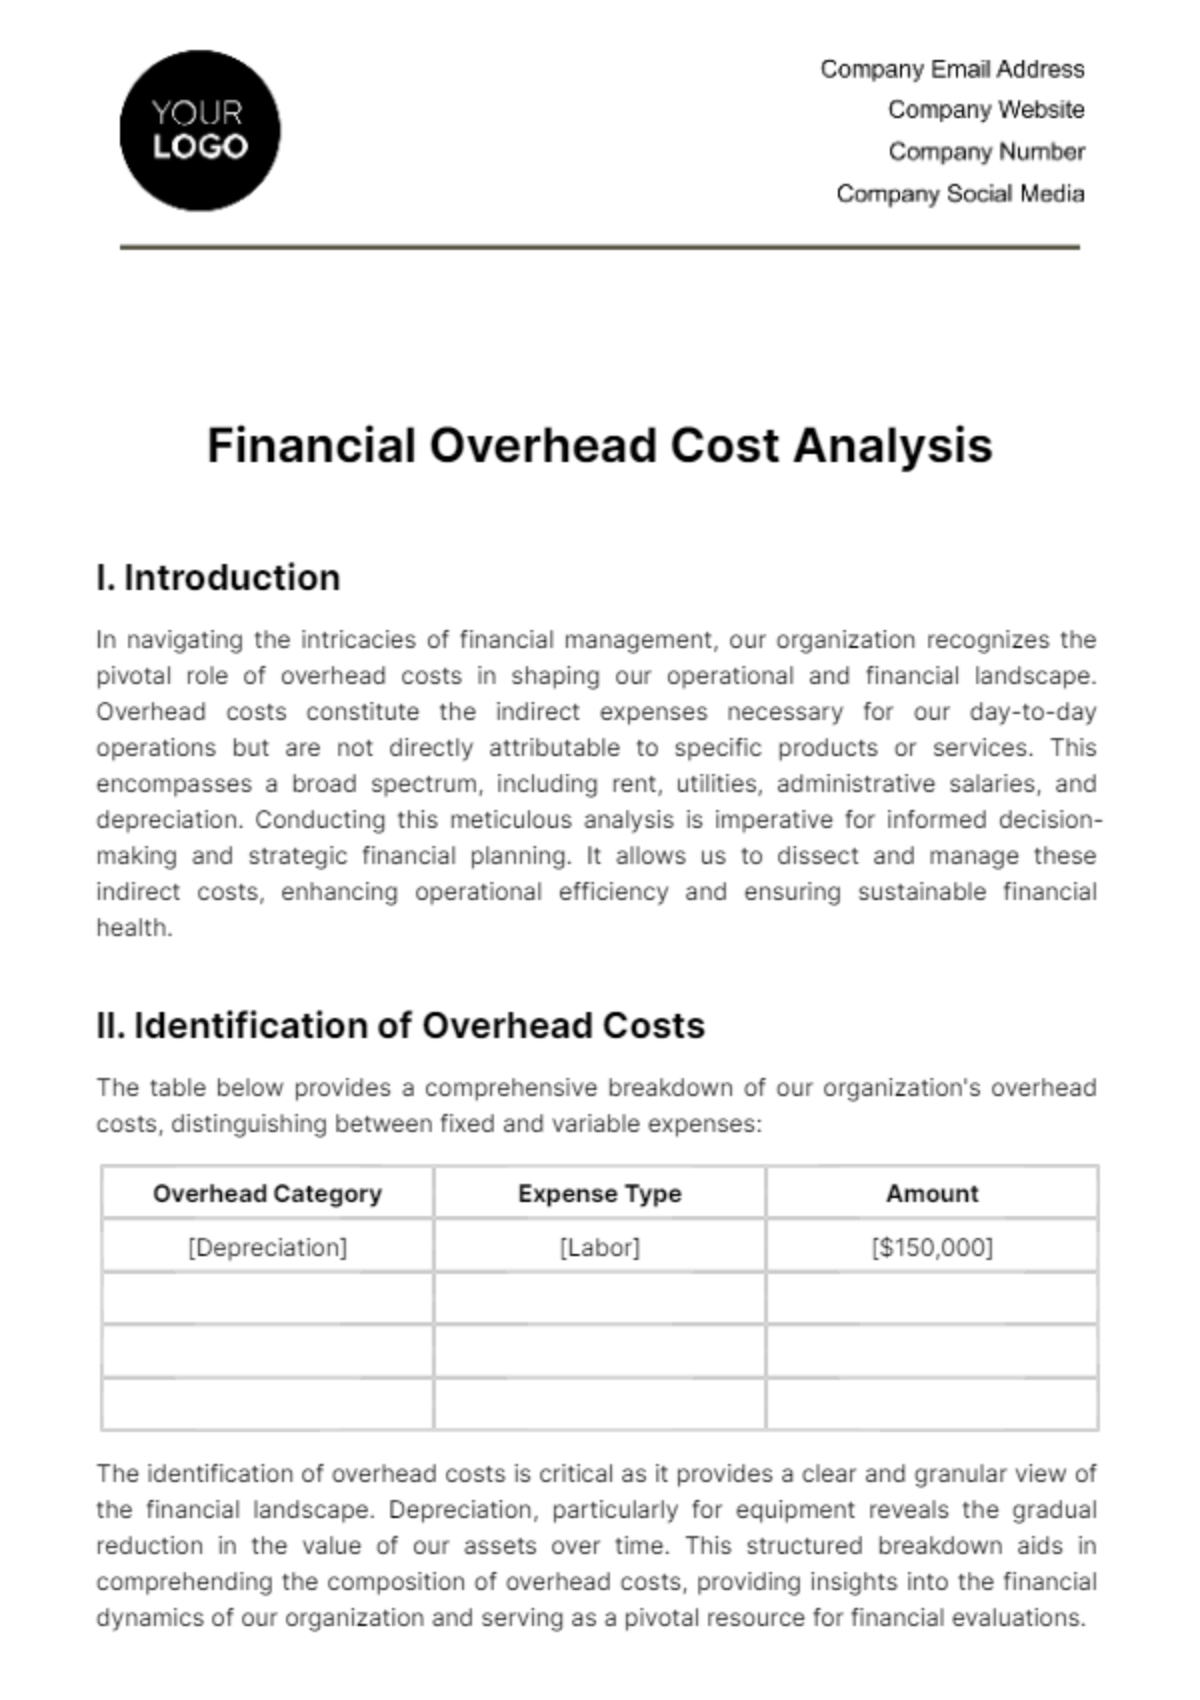 Financial Overhead Cost Analysis Template